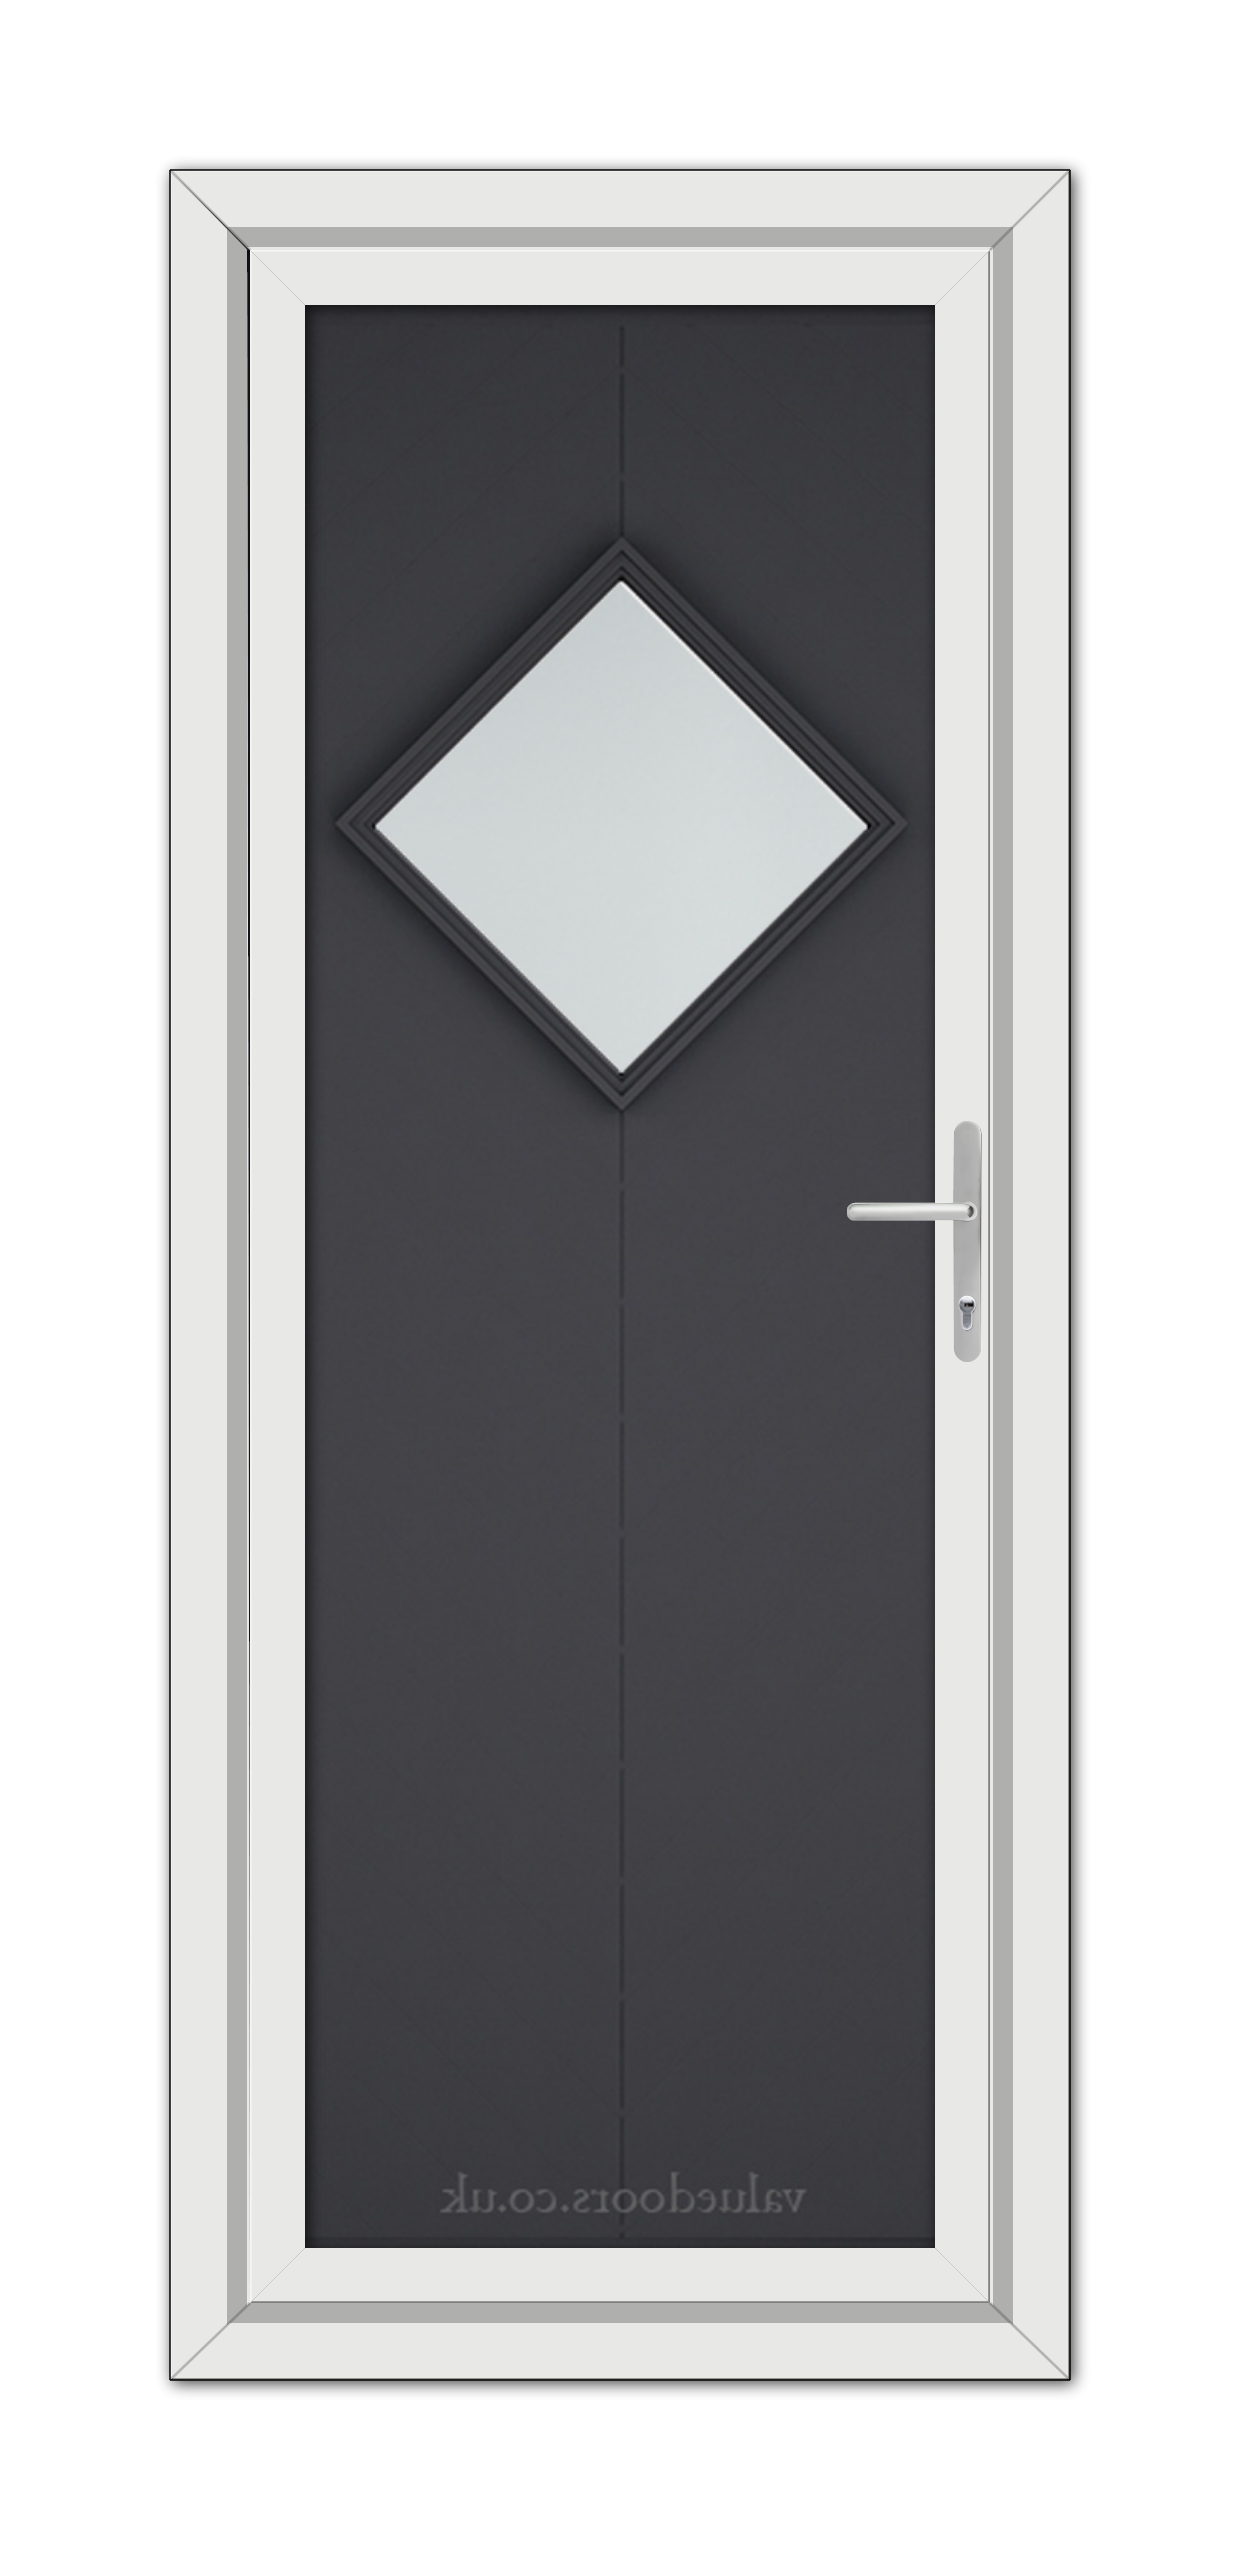 A modern Grey Hamburg uPVC Door with a diamond-shaped window and a silver handle, framed in white.